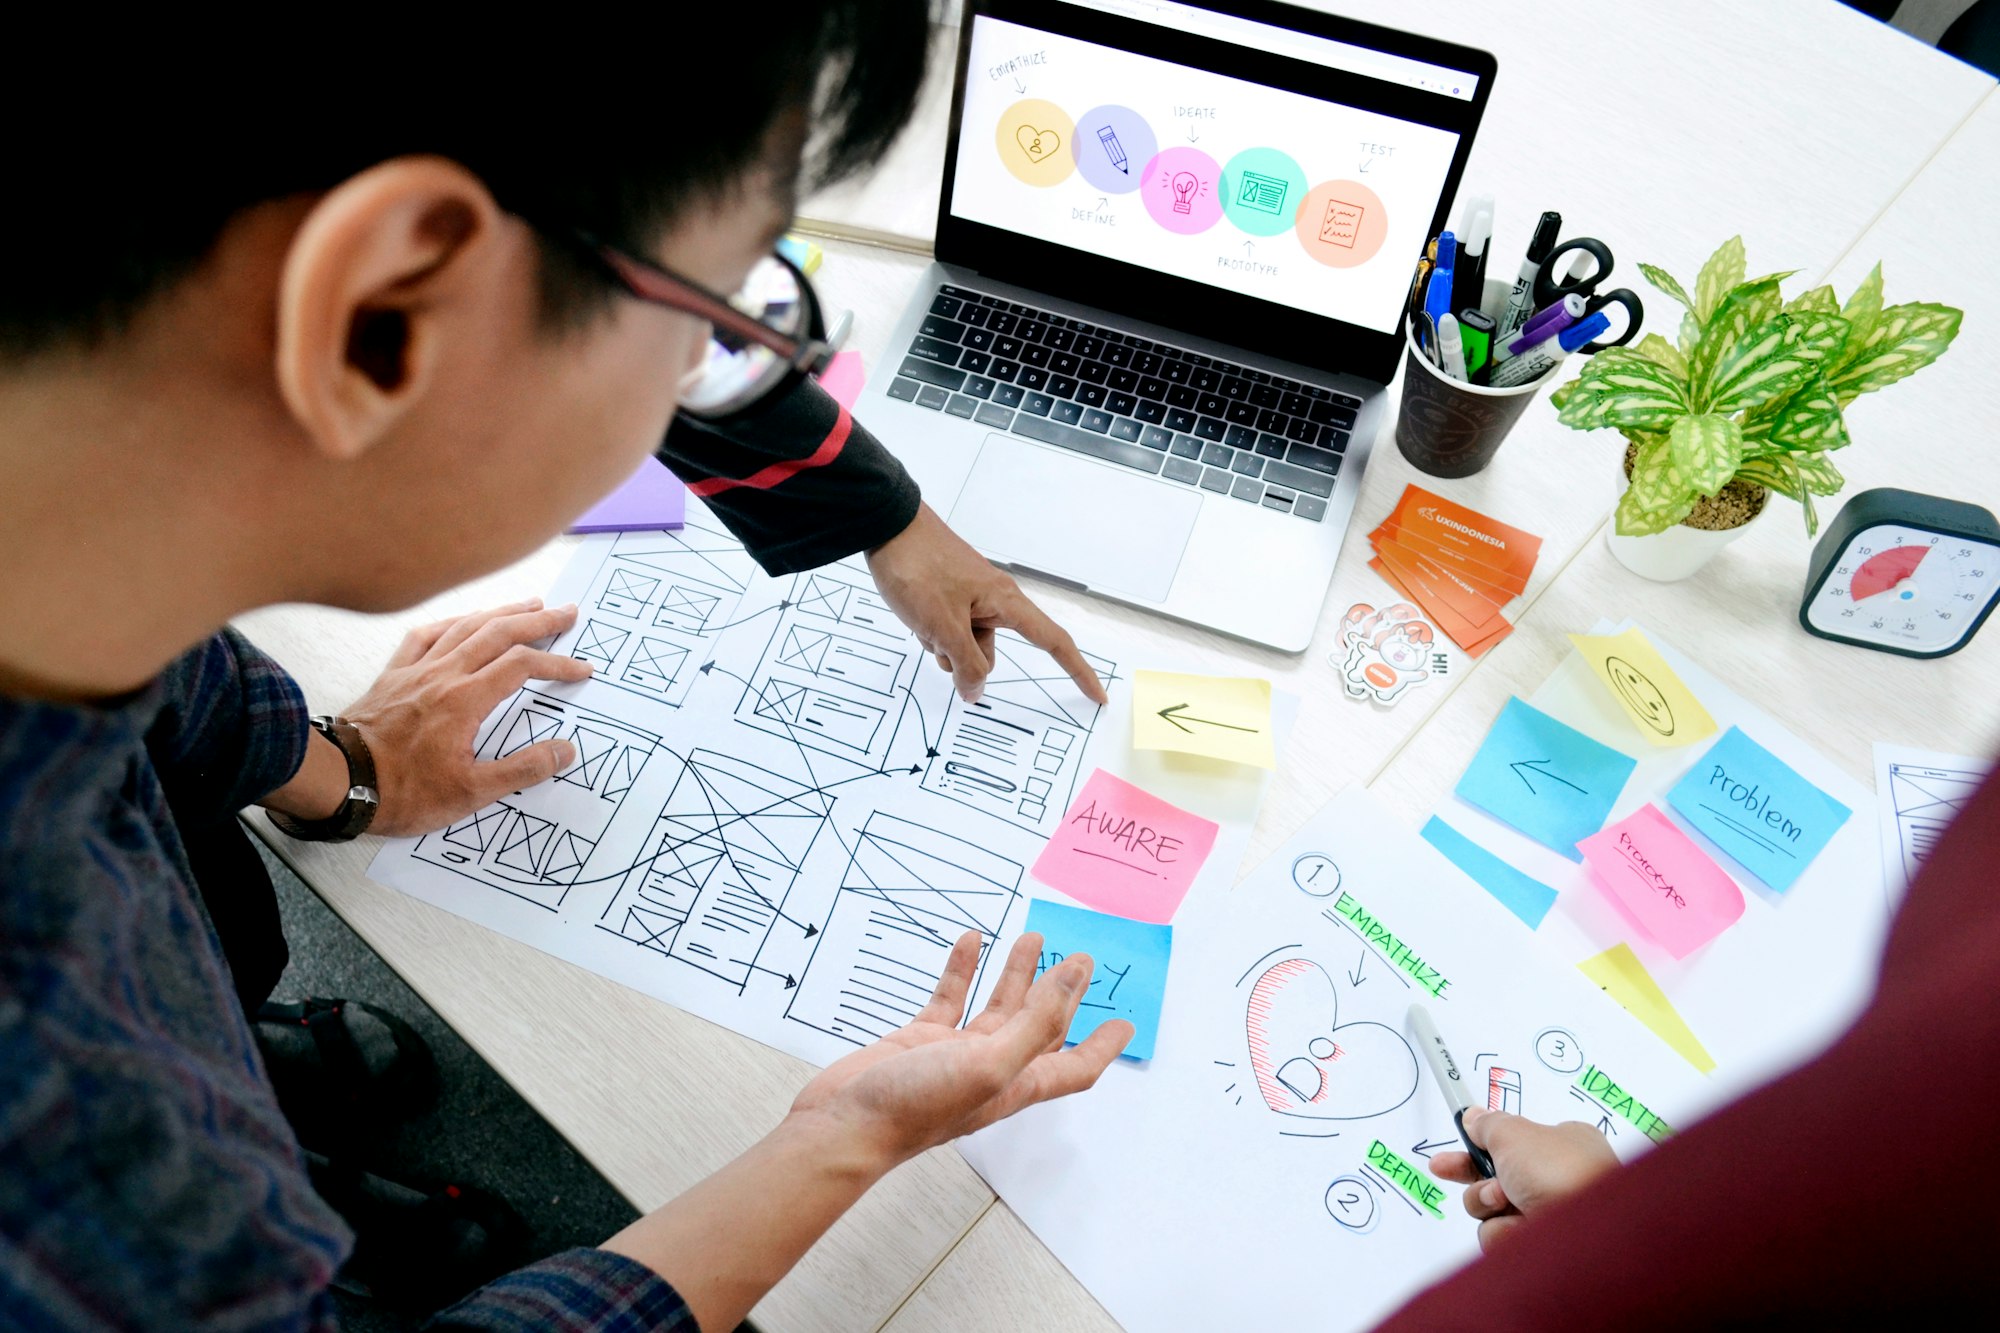 The 5 Promising Career Paths in UX Design